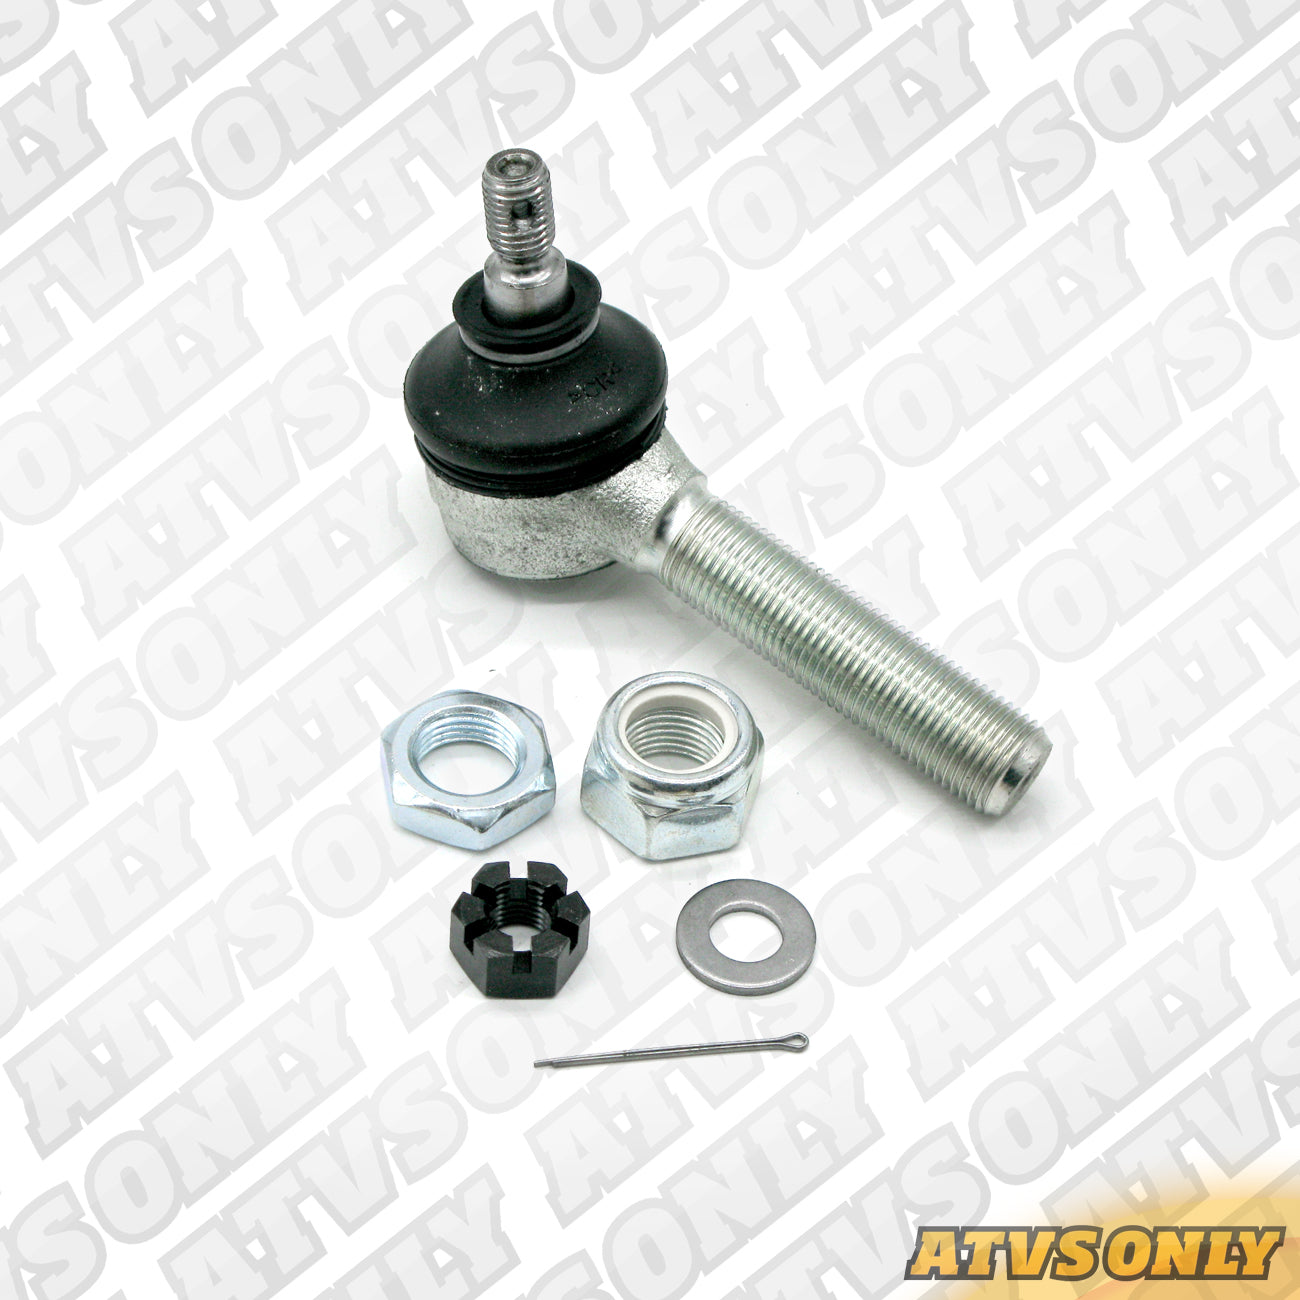 A-Arm Ball Joint (Laeger/Omni – Lower/Upper) for Suzuki LTR450